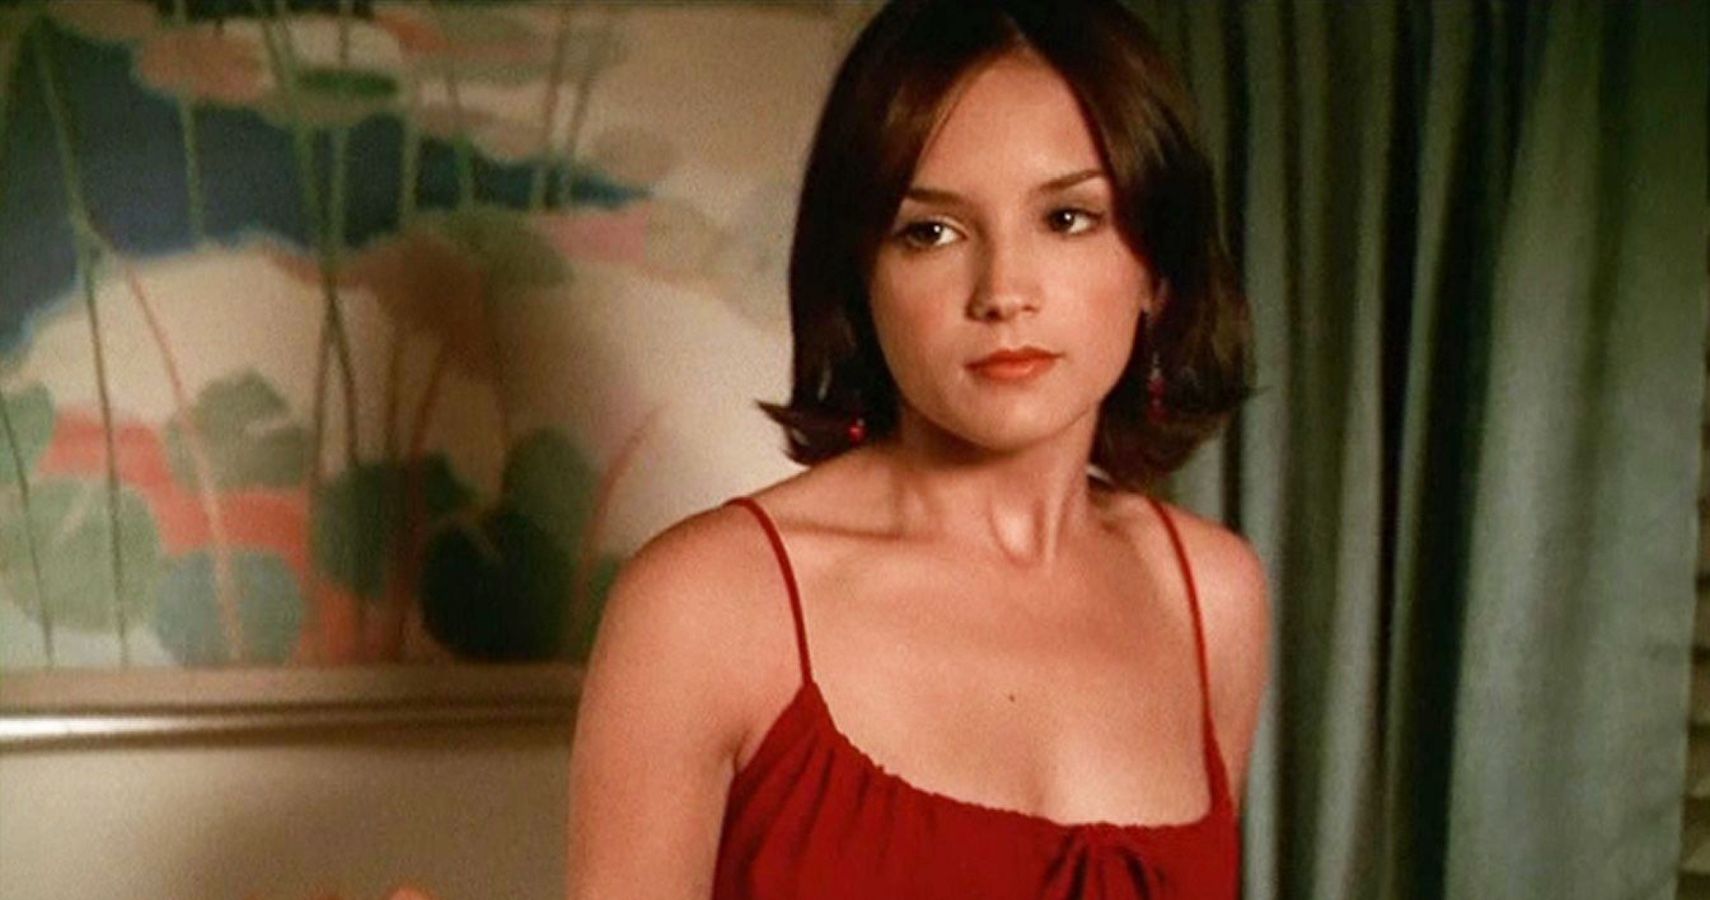 Rachael Leigh Cook as Laney Boggs in She's All That